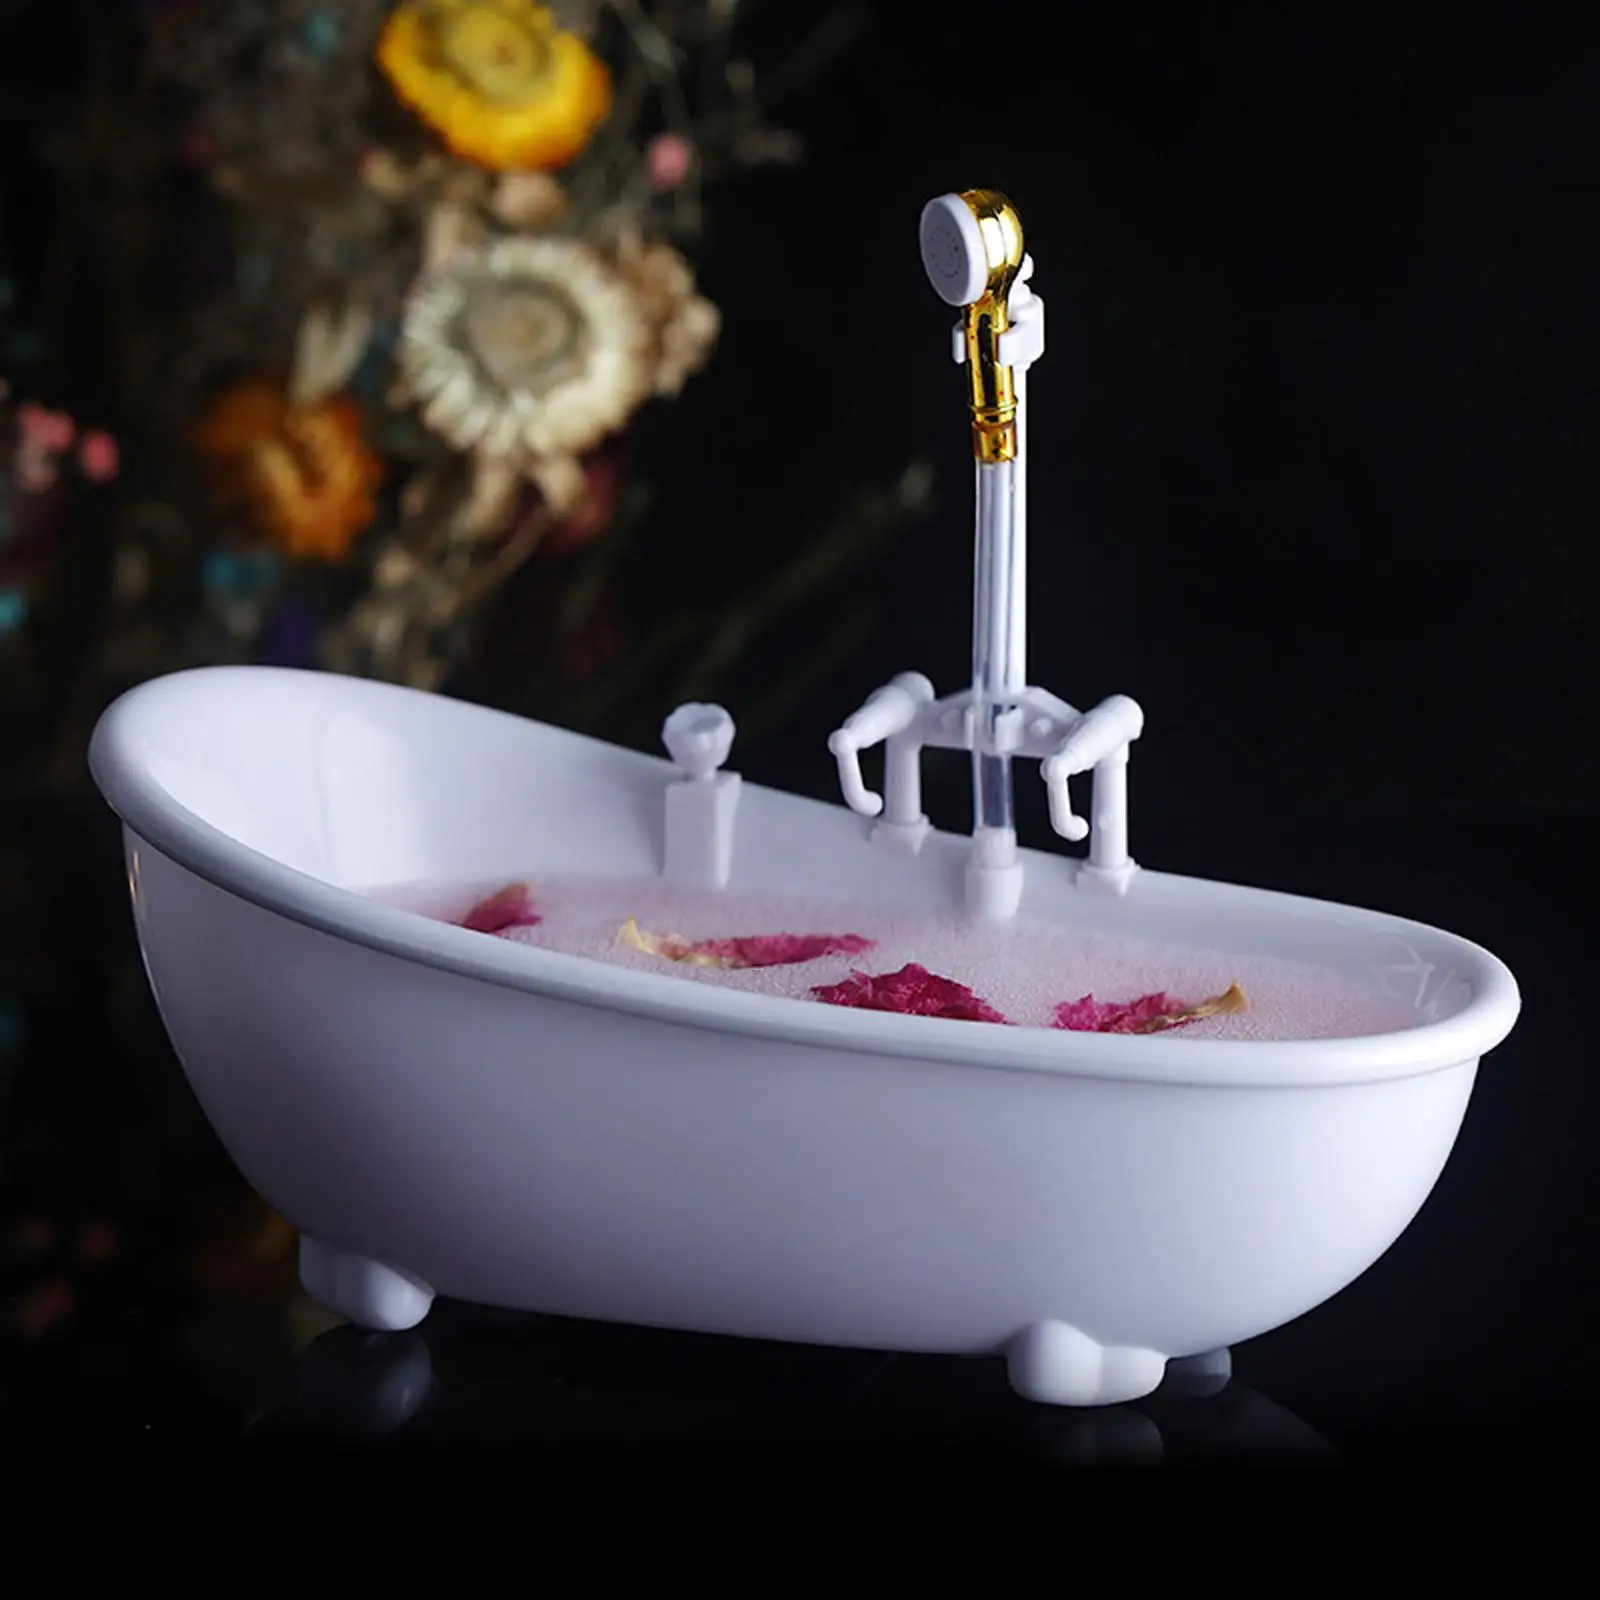 3D Electronic White Detachable Adjustable Pretend Working Sink